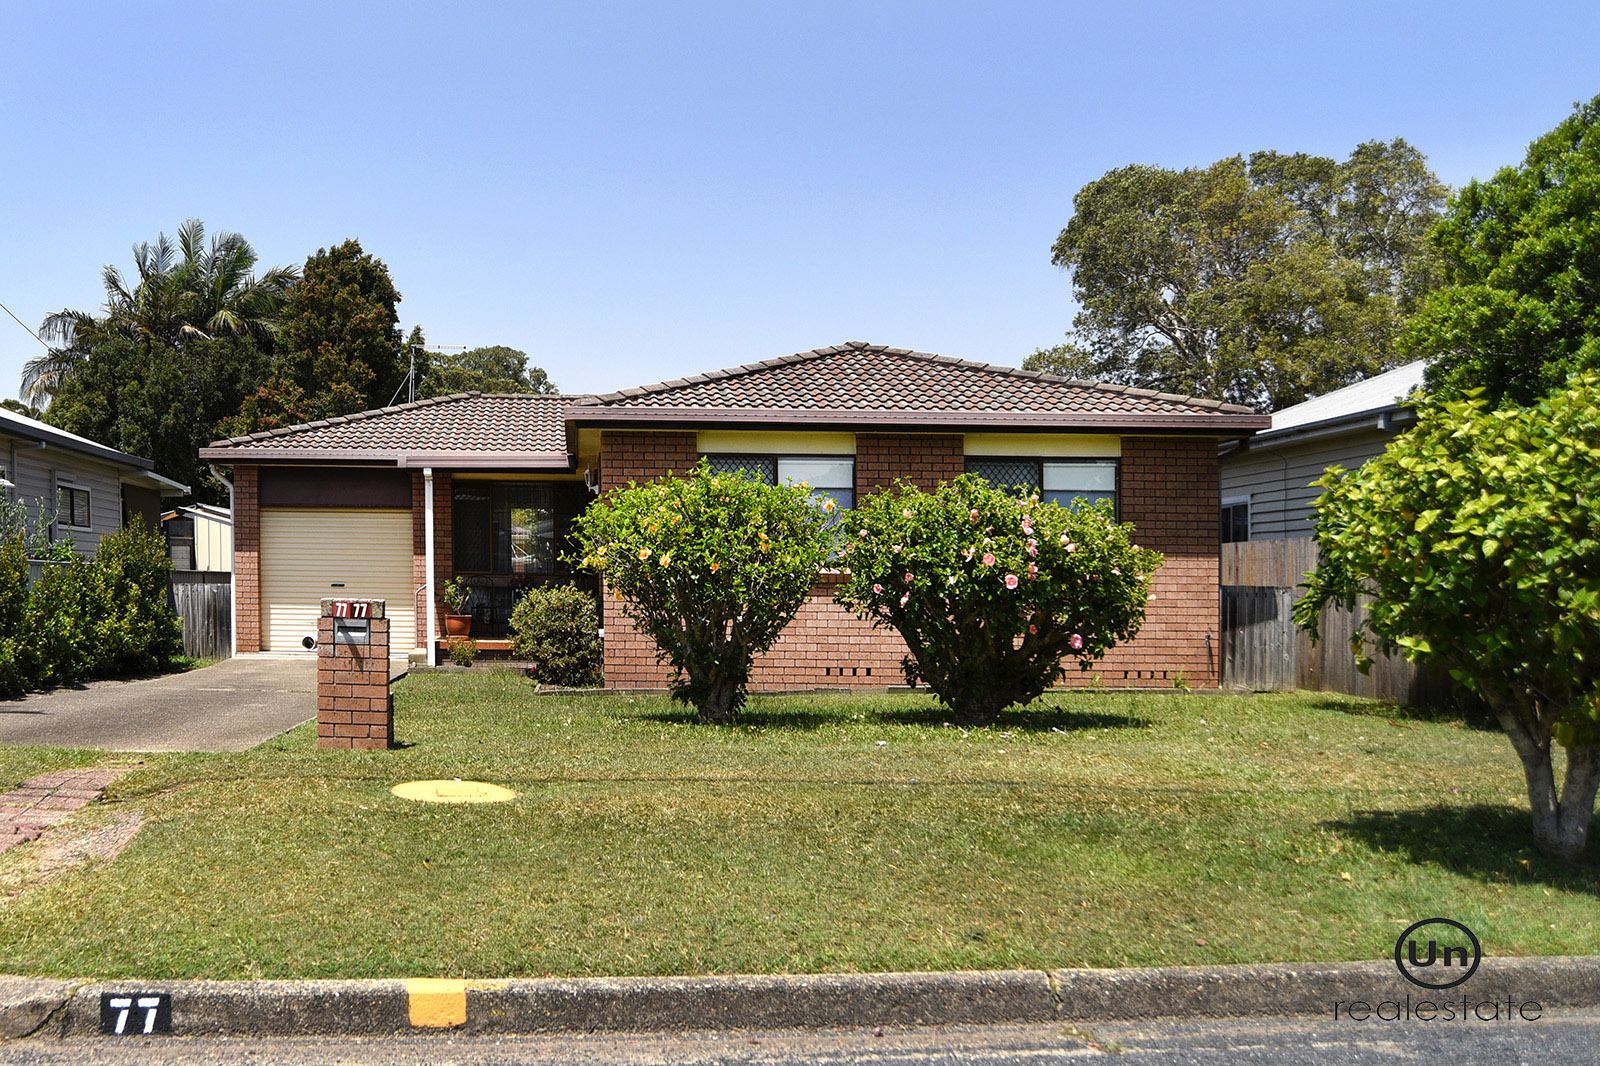 77 Circular Avenue, Sawtell - Front of House